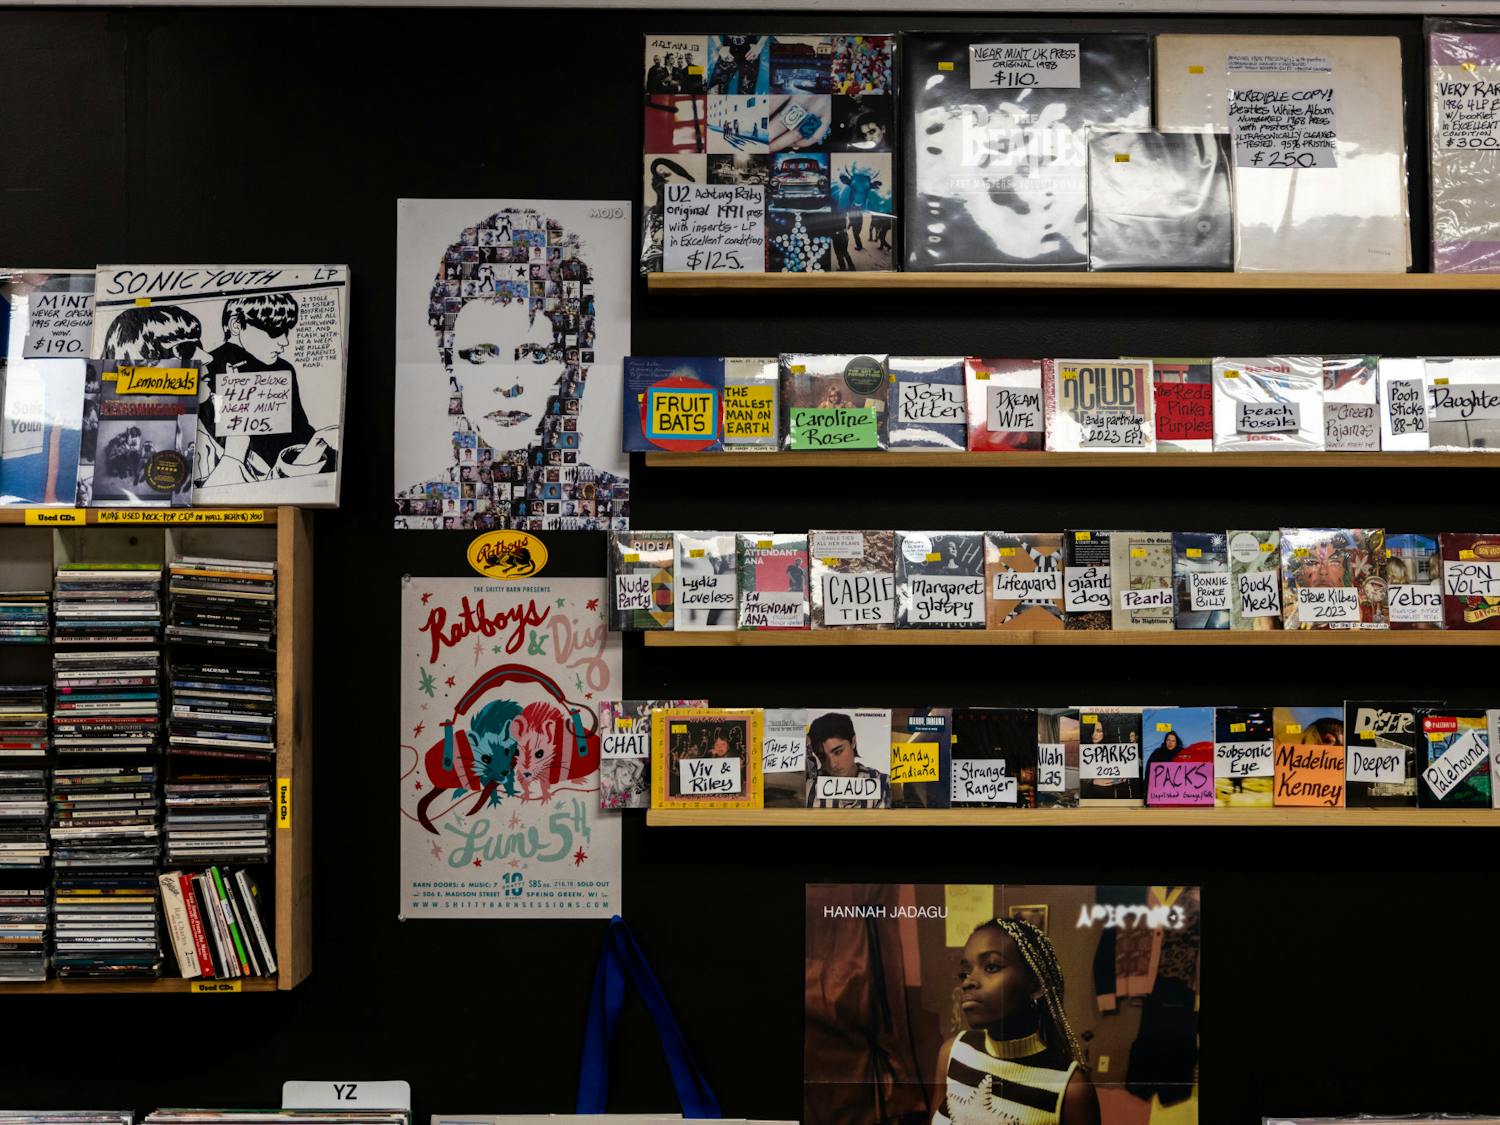 PHOTOS: B-Side Records – A small business with an impactful history 